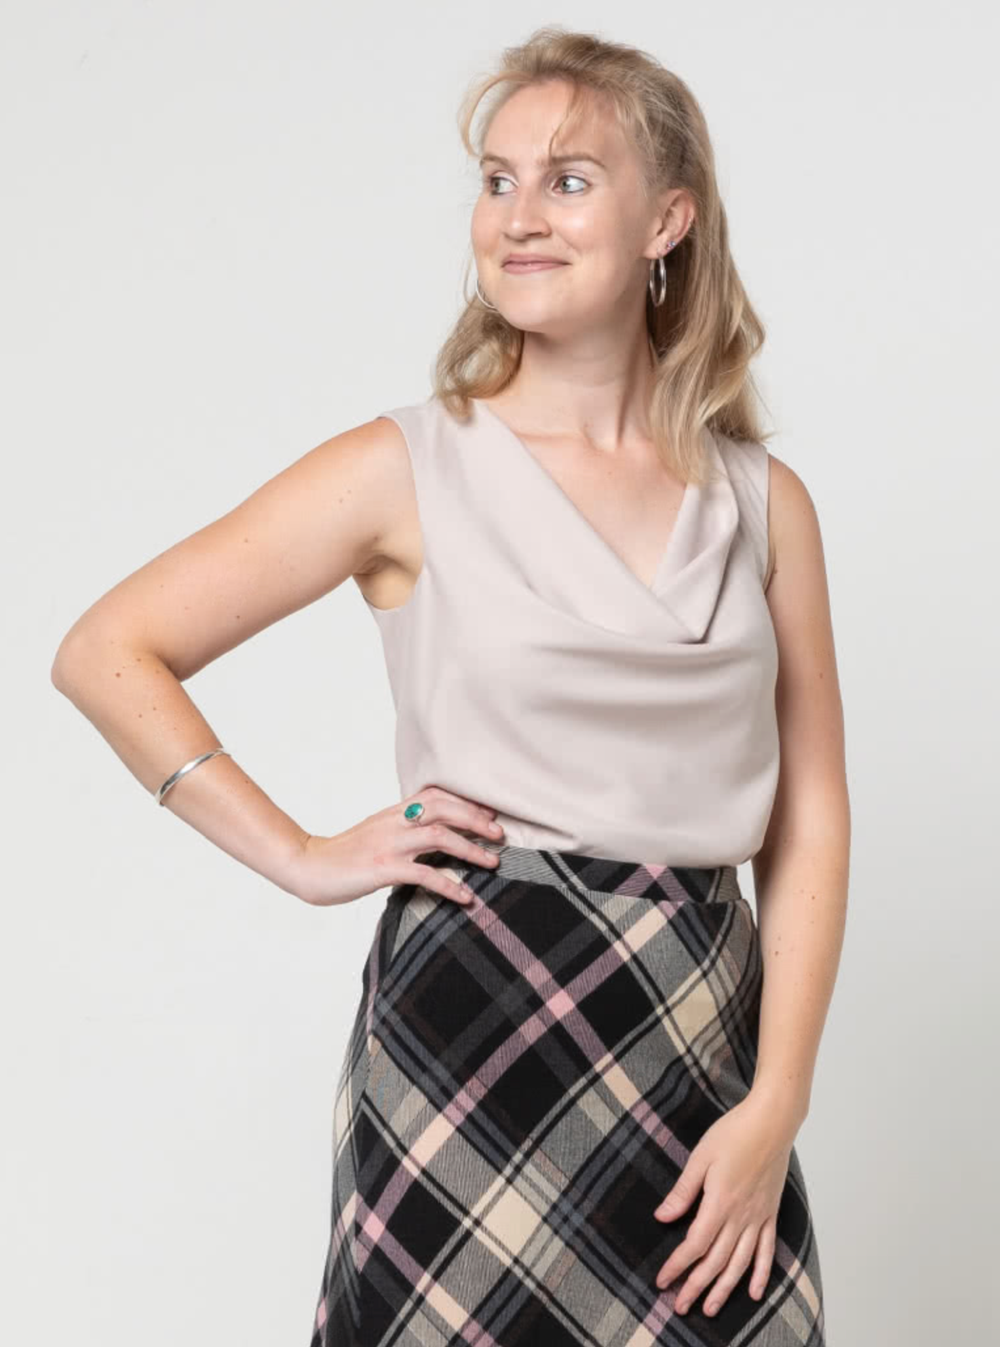 Woman wearing the Monroe Woven Top sewing pattern from Style Arc on The Fold Line. A top pattern made in silk, rayon, or any soft fabrics, featuring a cowl neck, sleeveless, bias cut, lined, and sits on the high hip.